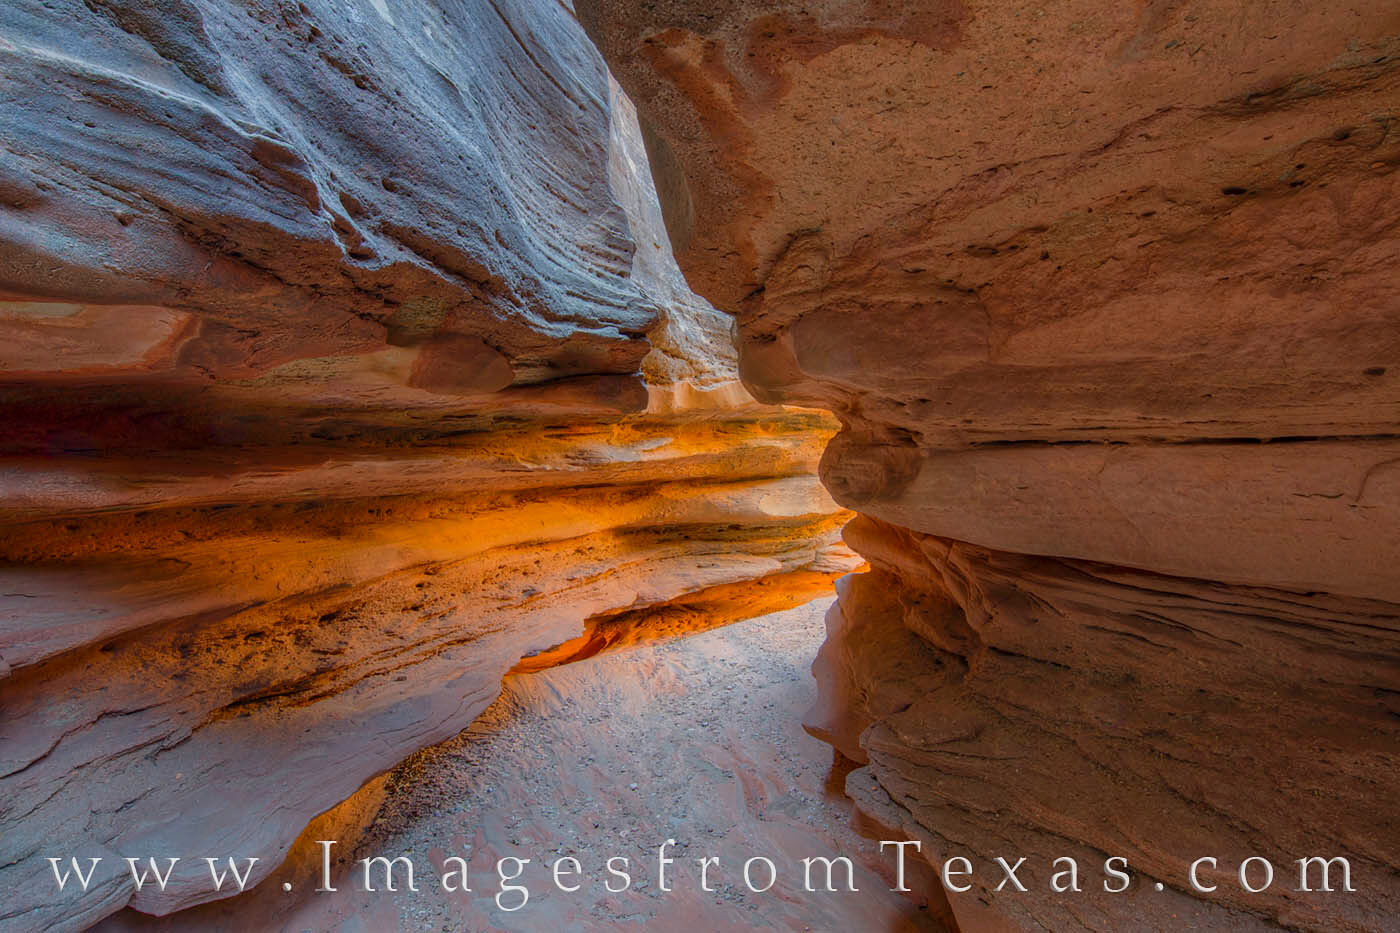 The Central Utah Slot Canyons are located in a remote and seldom seen portion of Palo Duro Canyon. The beautiful rock structures...